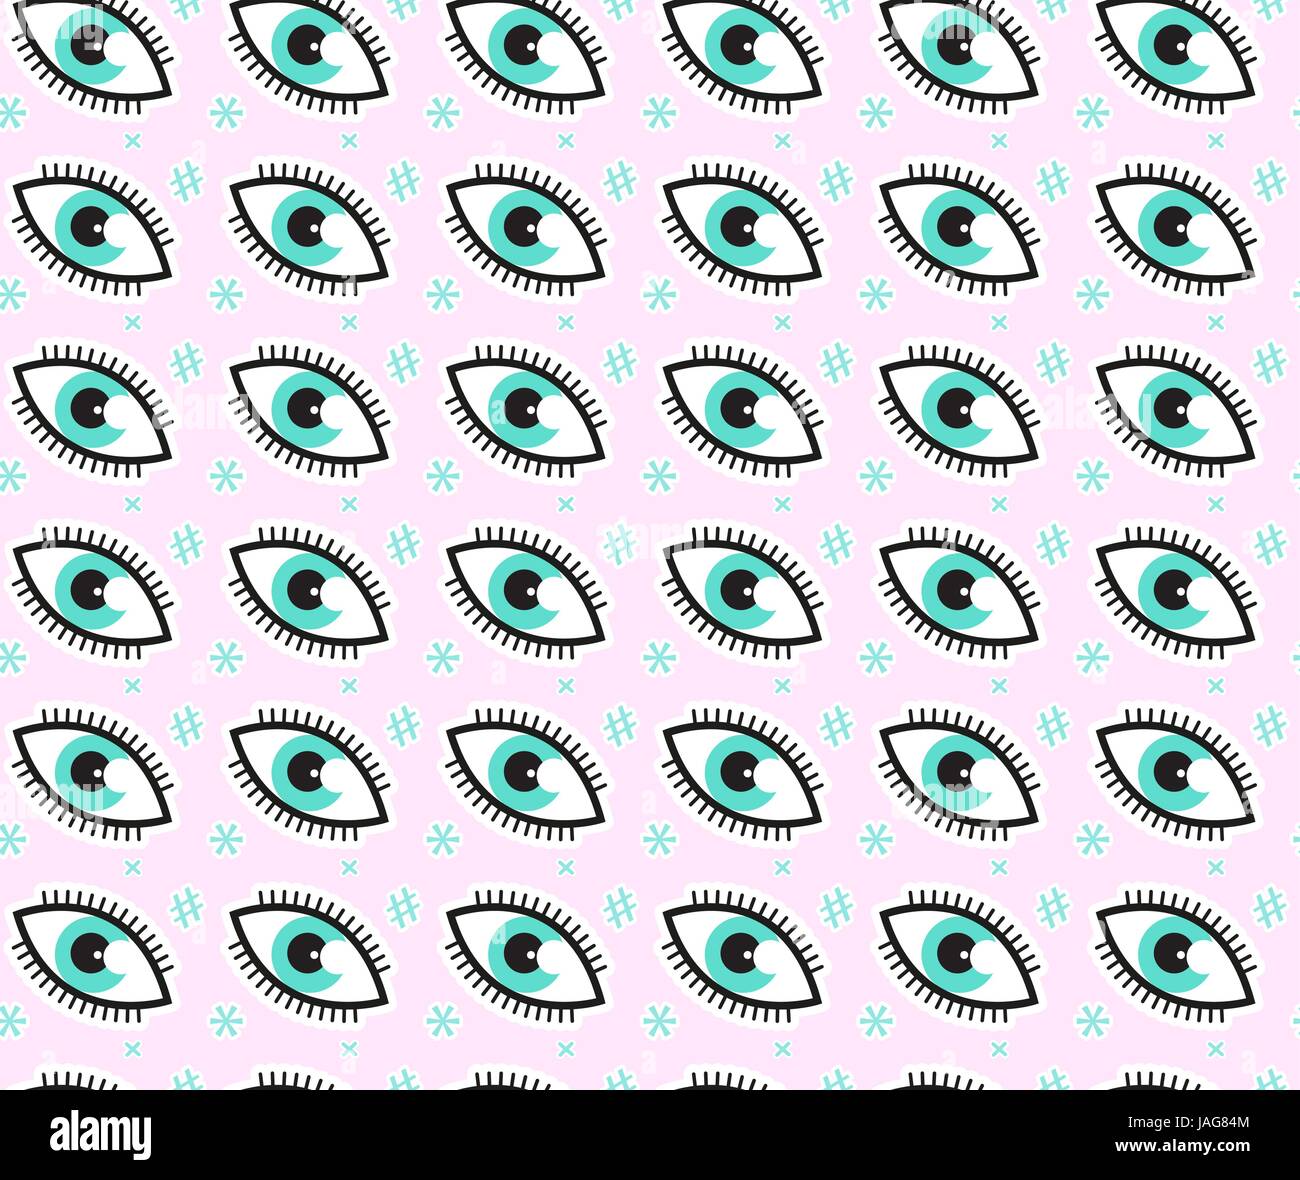 Eye seamless pattern in comic style, pop art. Colorful endless background, repeating texture. Vector illustration. Stock Vector